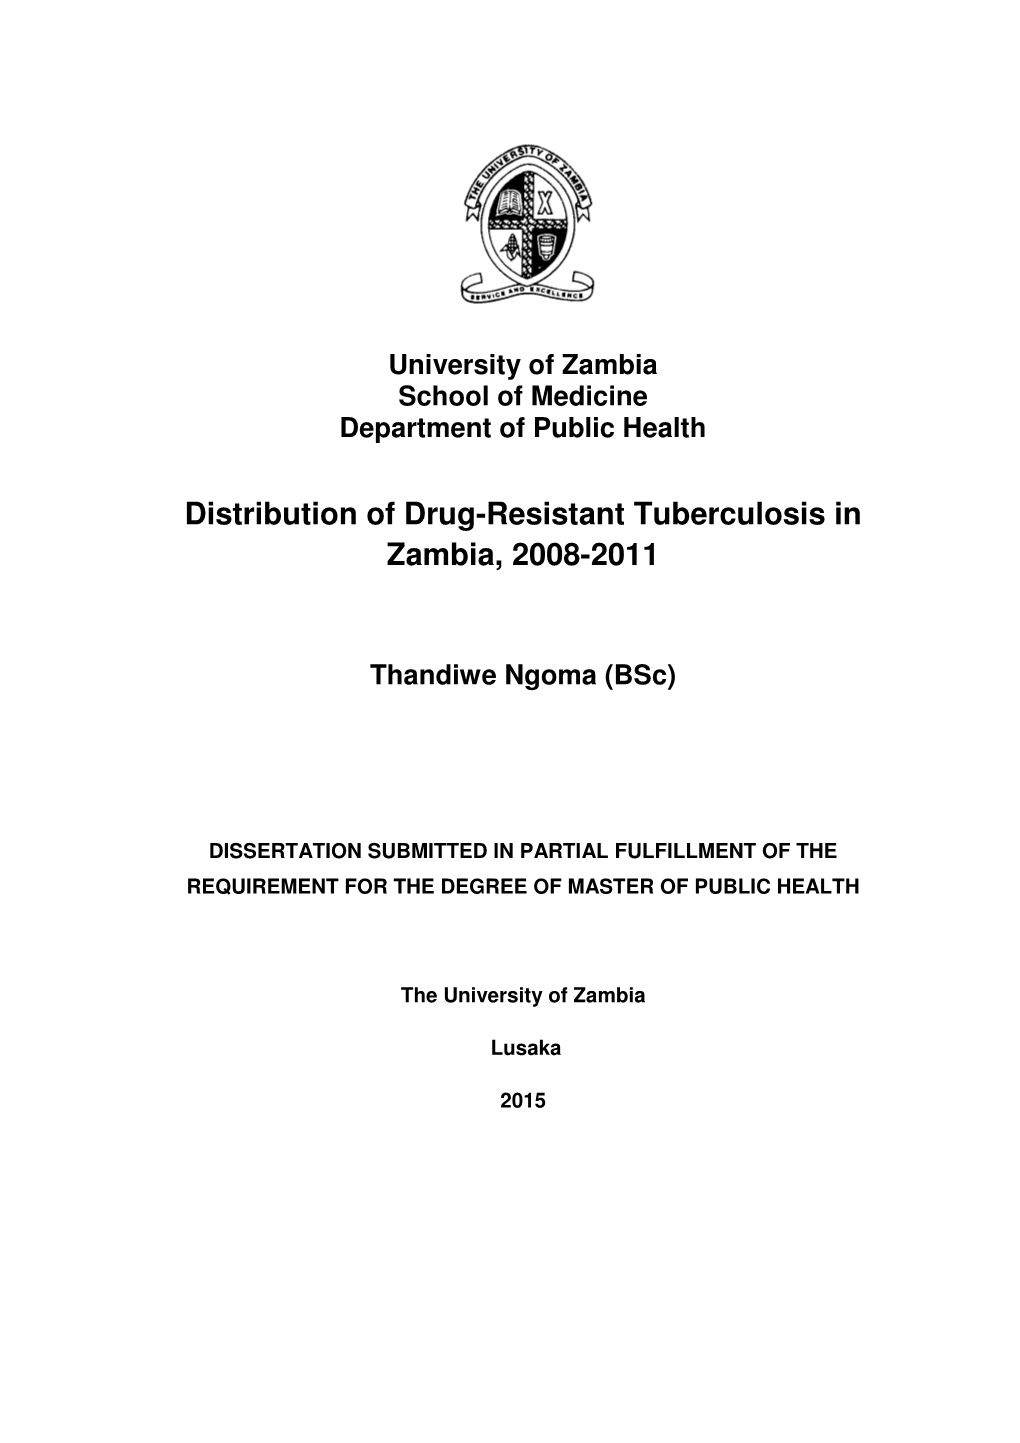 Distribution of Drug-Resistant Tuberculosis in Zambia, 2008-2011